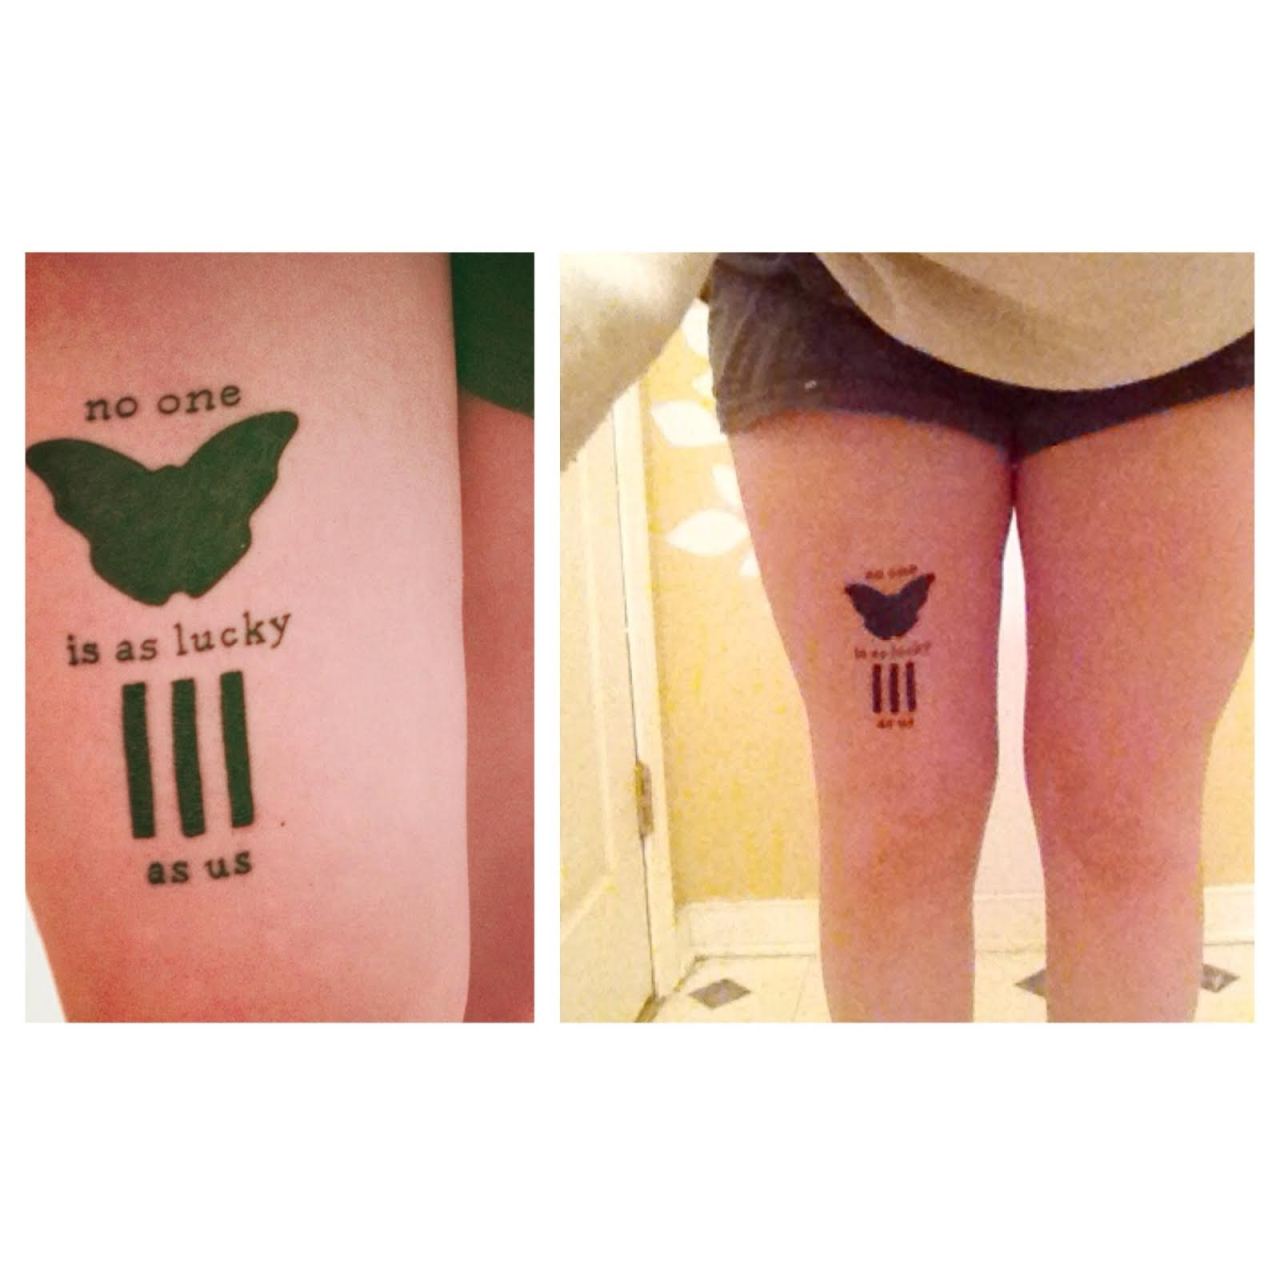 Paramore Inspired Tattoos — Where Hayley's cross is, and designed